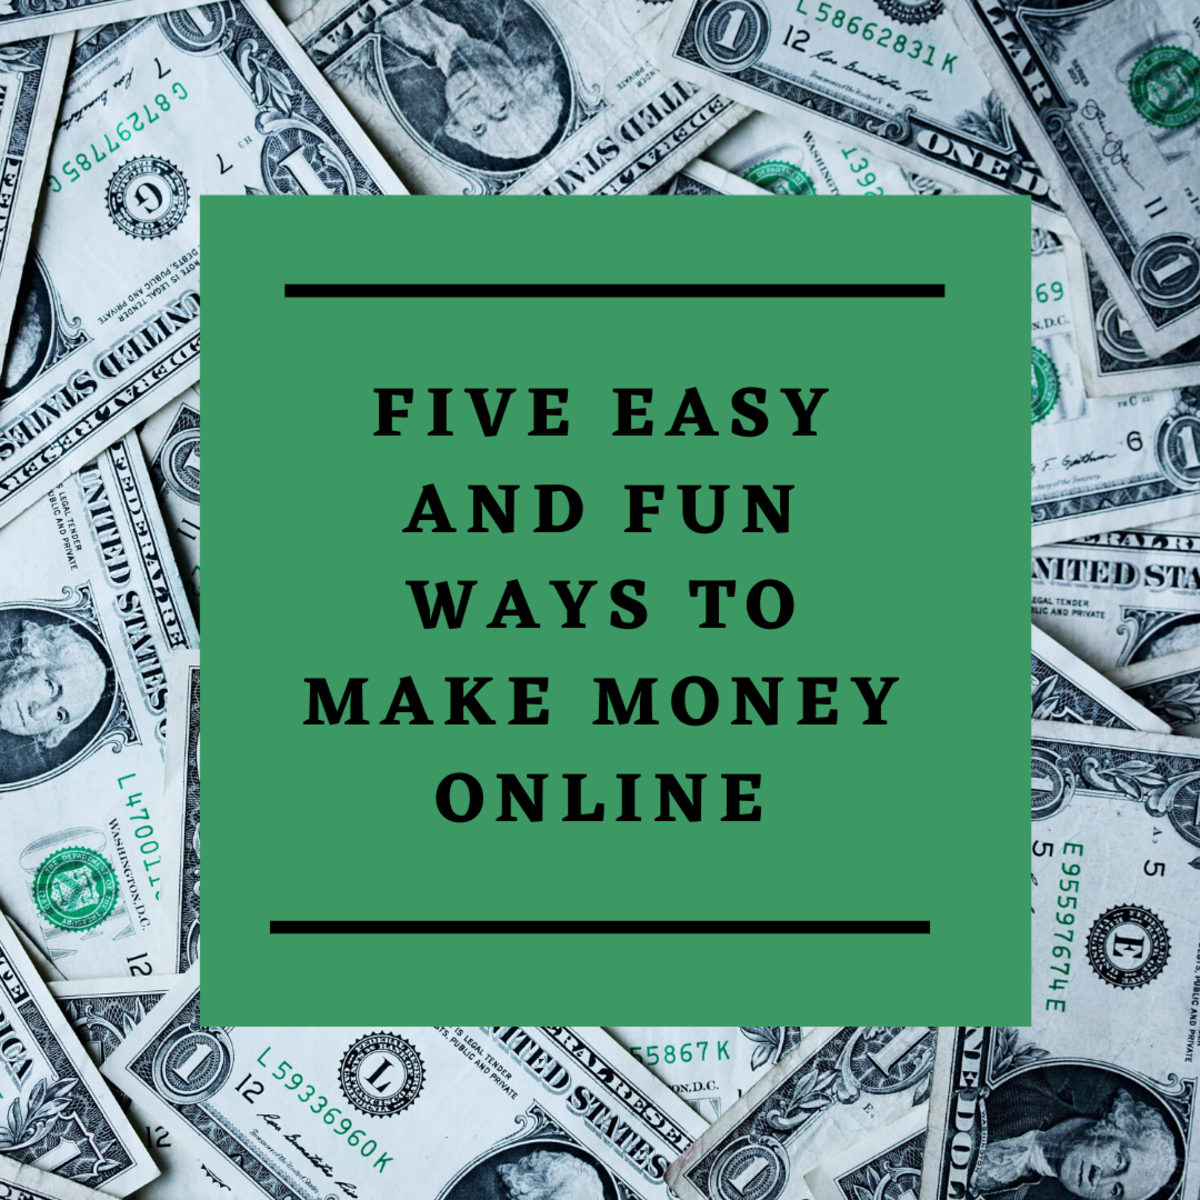  how to earn money in online without investment 